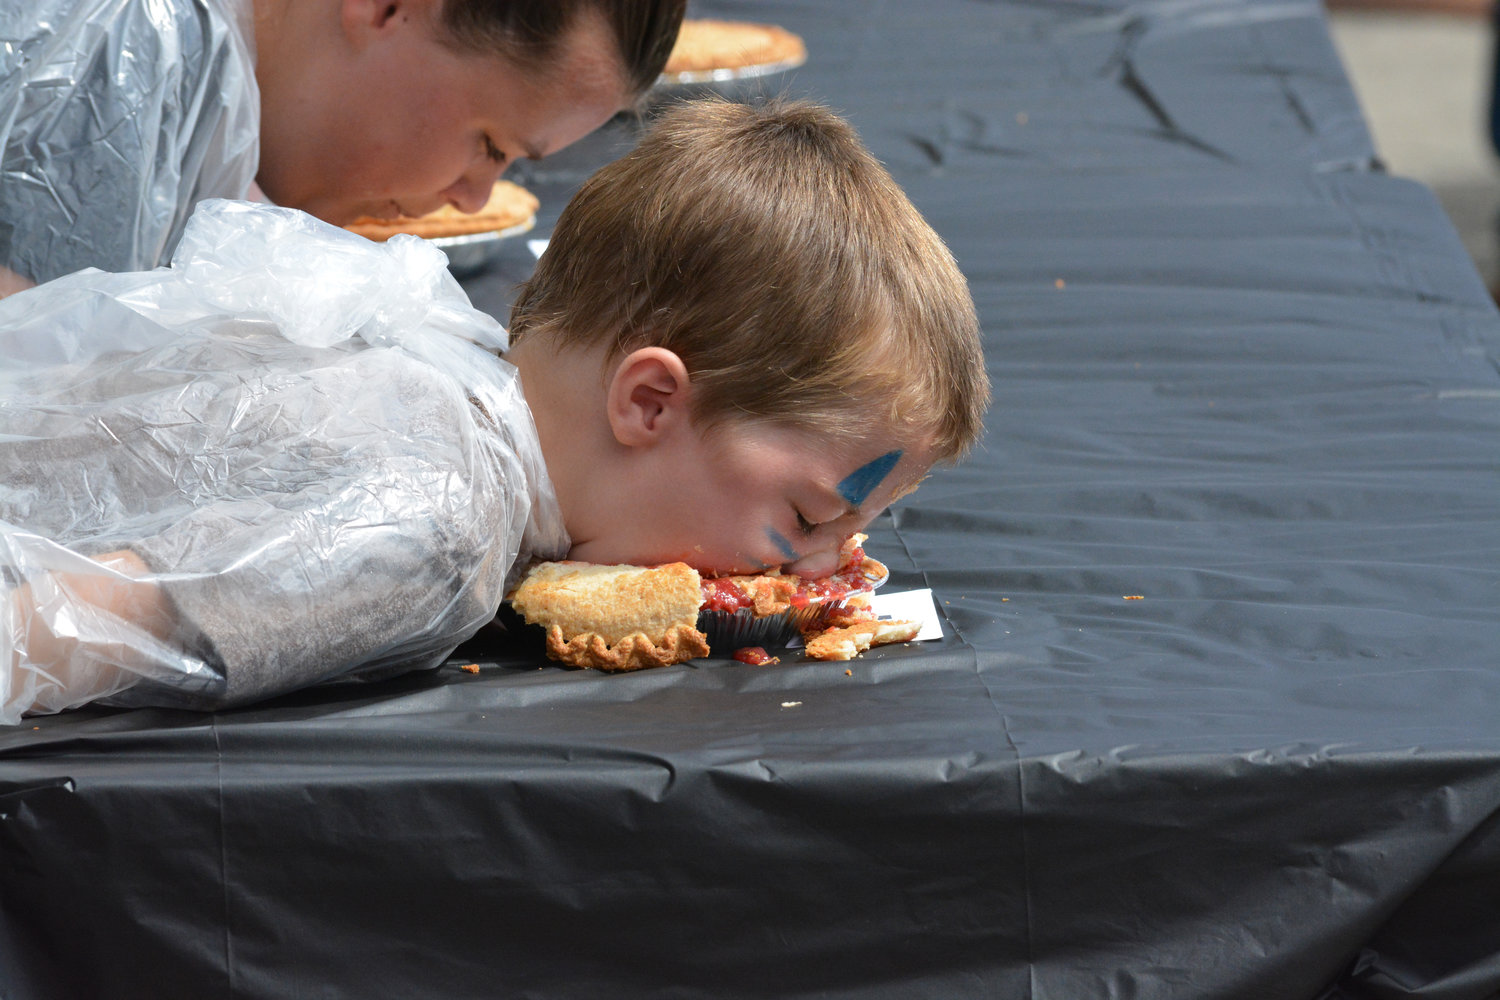 Carson Sloan, 4, chows down on a cherry pie at the pie eating competition at the Nisqually Valley Barbecue Rally on July 23.